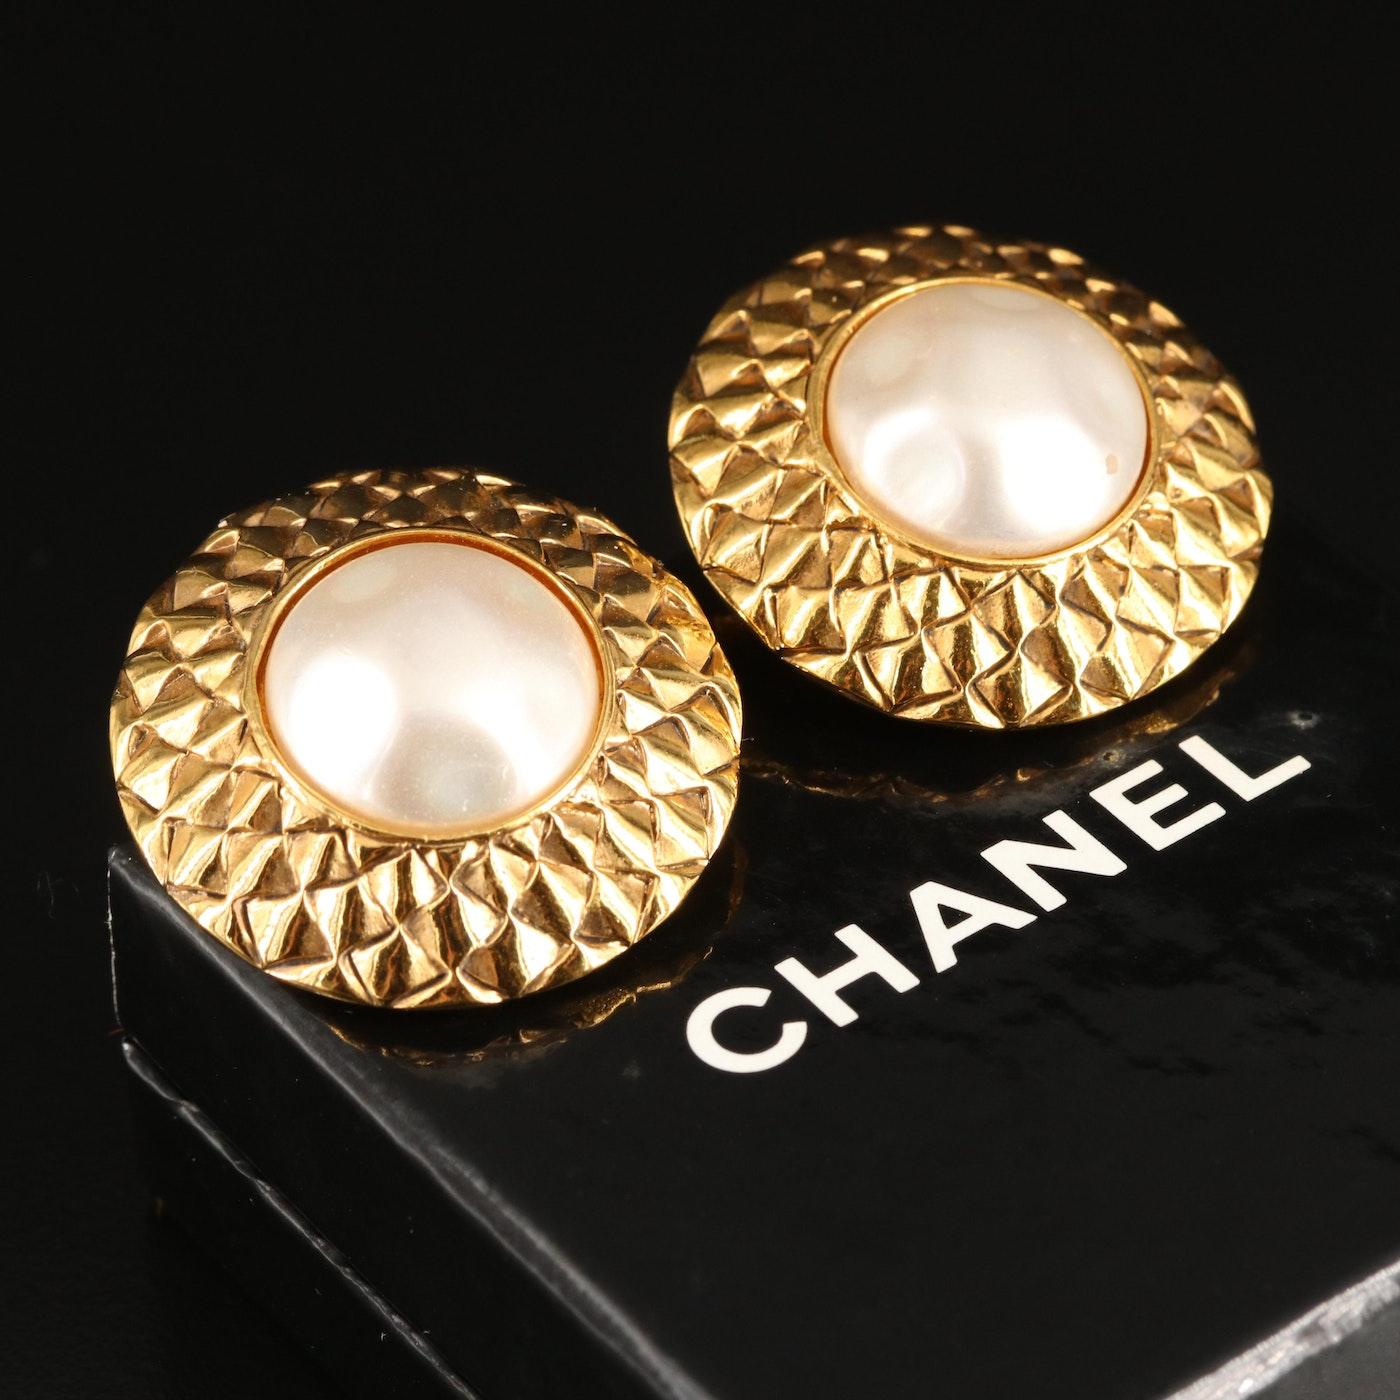 Stunning Vintage Chanel Earrings
Large Clip On
1980's
Faux Pearl and Gold Metal
Button
Hallmarks: © CHANEL ® 23 Pictorial, Made in France
Excellent Vintage Condition
Tiny Rubbing on one faux pearl